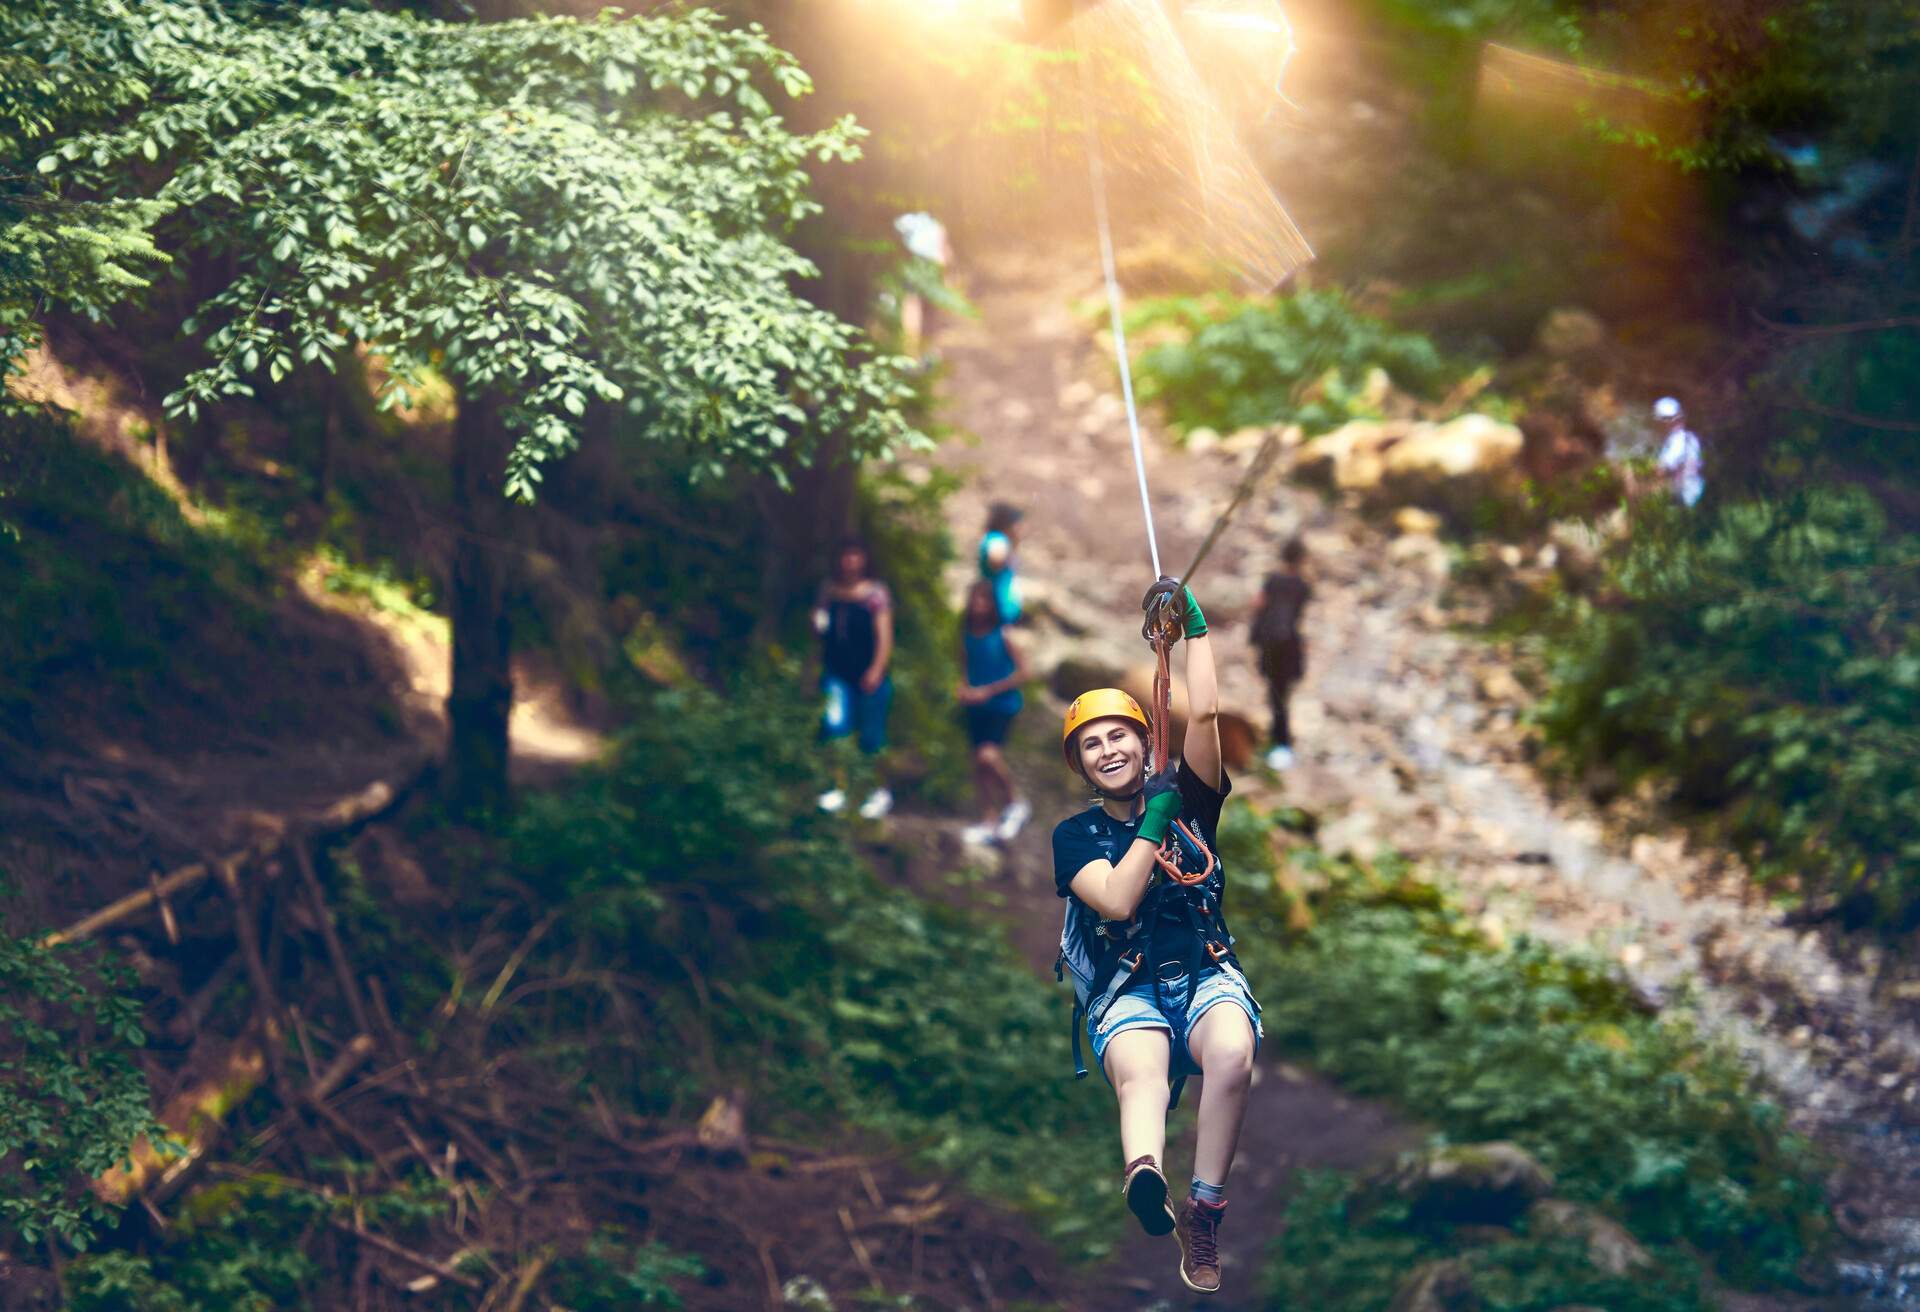 A young woman joyfully traverses a zip line, laughing and enjoying the thrilling adventure, with the natural surroundings beautifully blurred in the background.